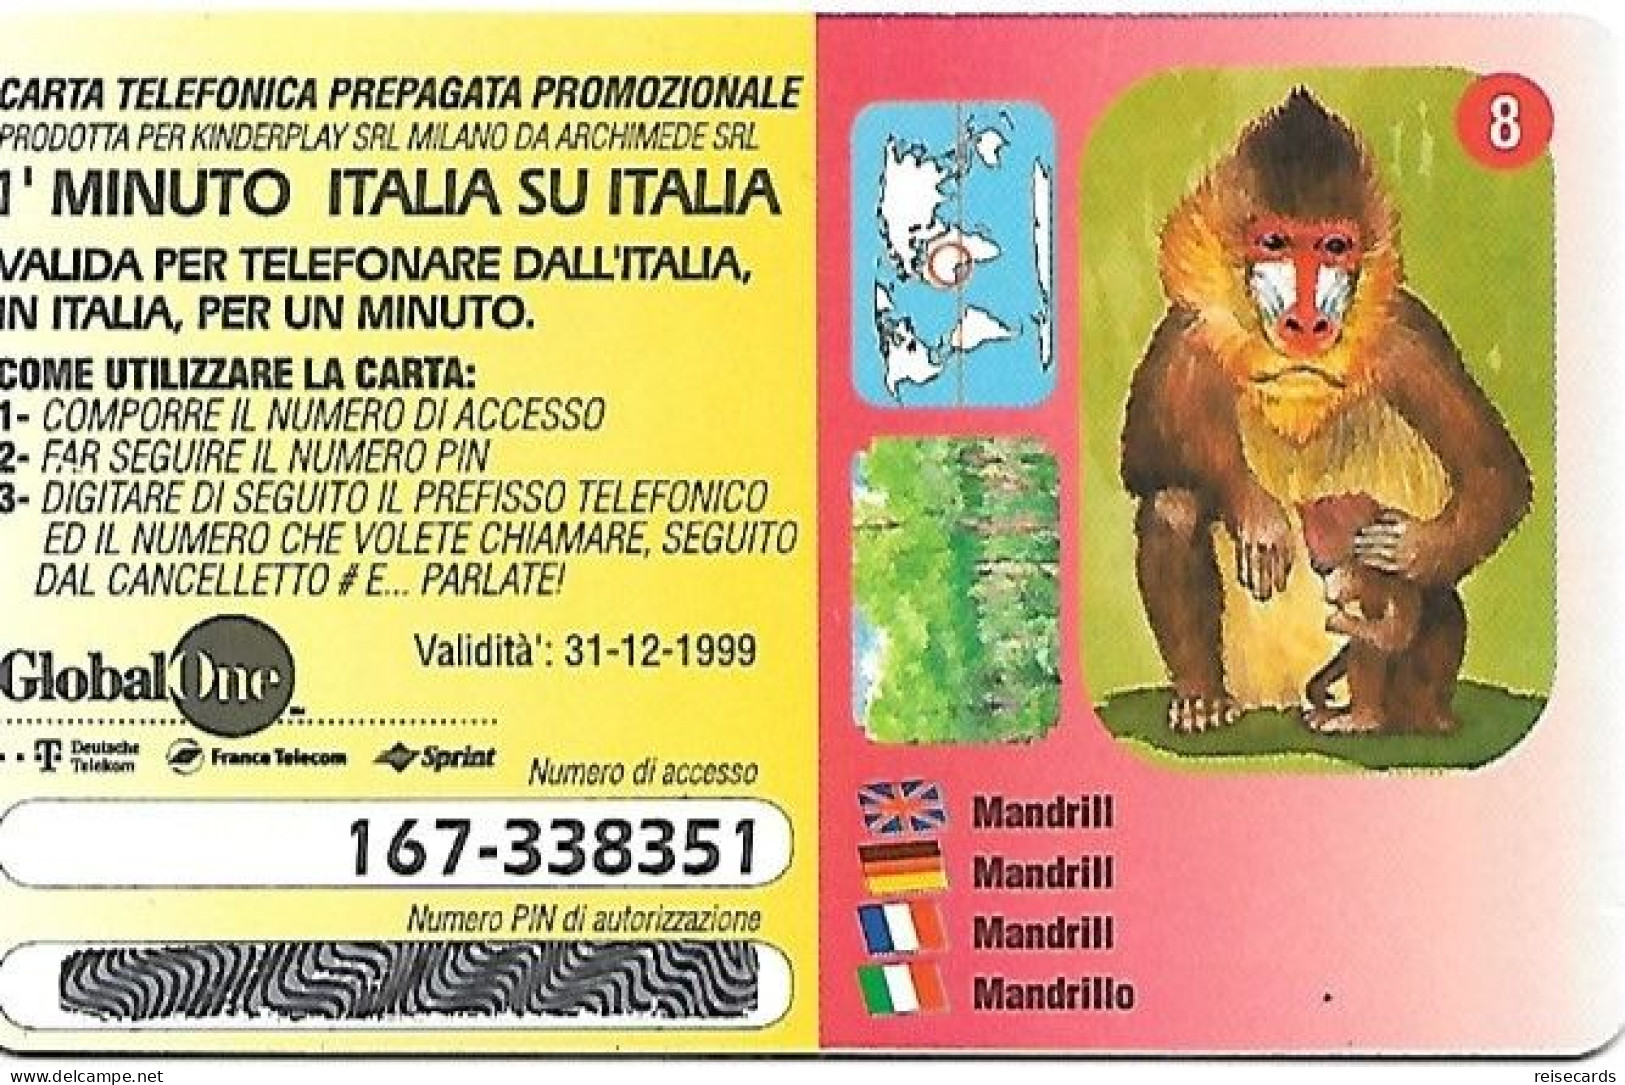 Italy: Prepaid GlobalOne - Save The Planet 8, Mandrill - Cartes GSM Prépayées & Recharges